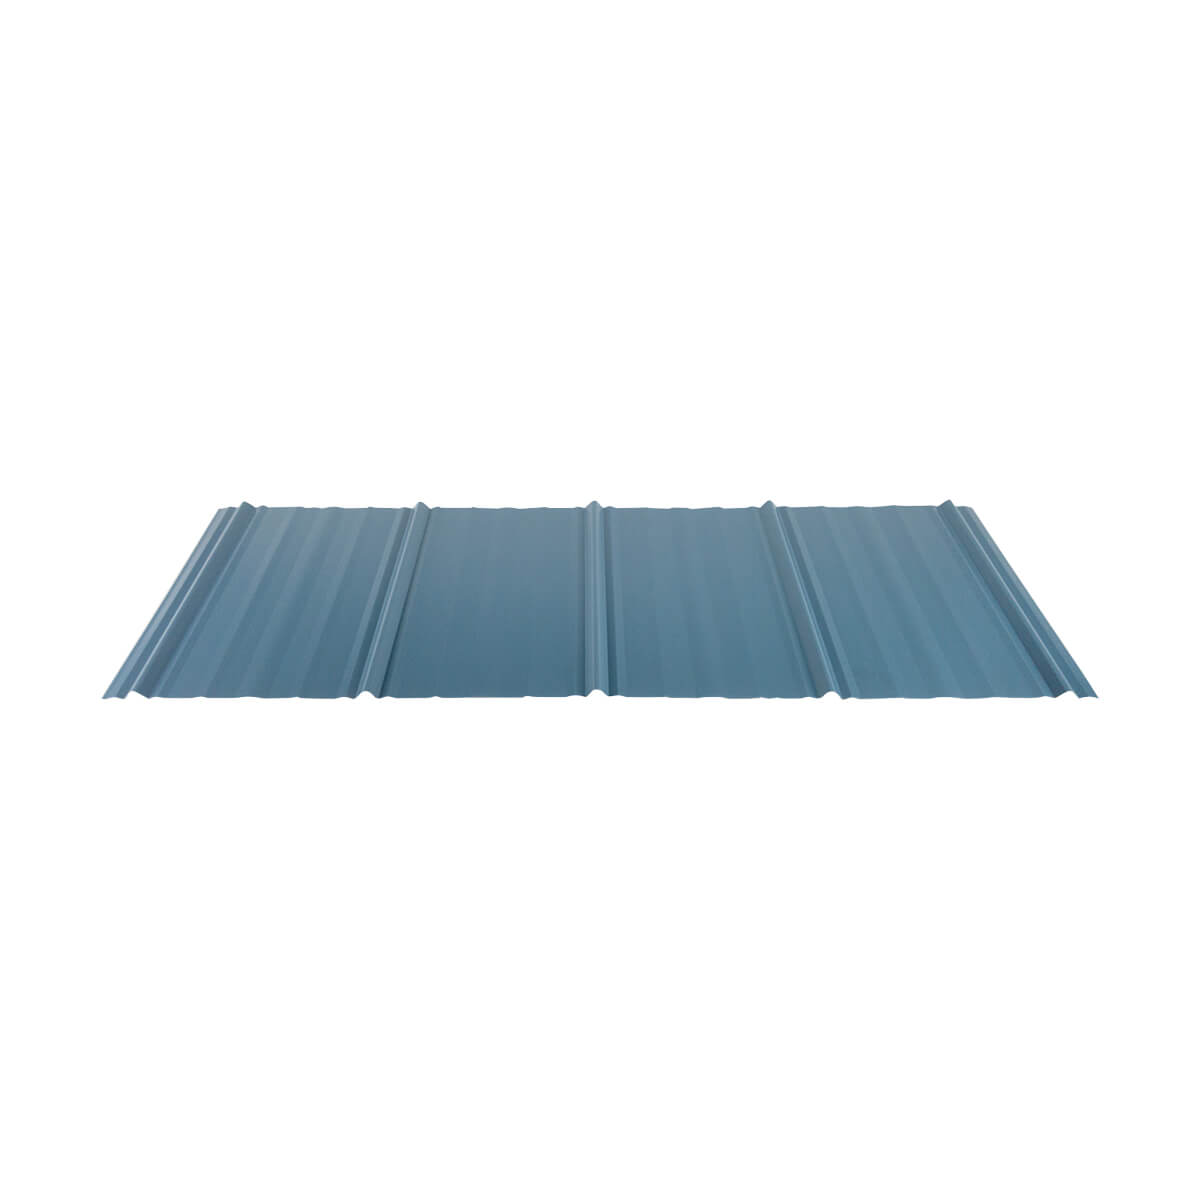 WeatherShield 1 Metal Sheets or Panels - 32-in x 10-ft